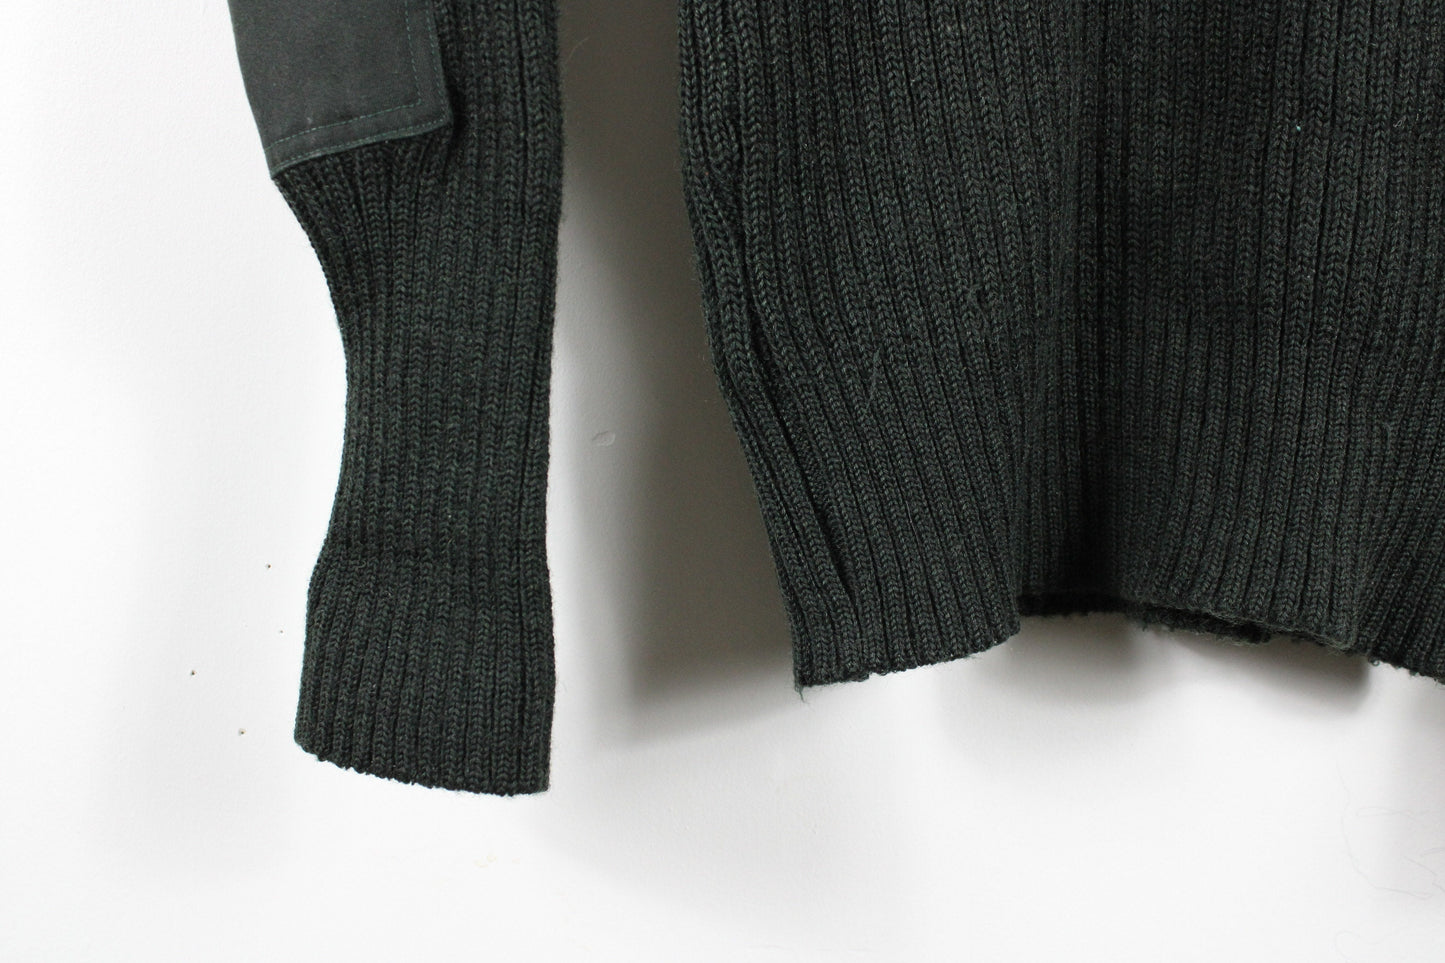 Wool Cable-Knit Military Sweater / 90s-80s Vintage Army Hand Knitted Sweatshirt / 90s / Olive Green